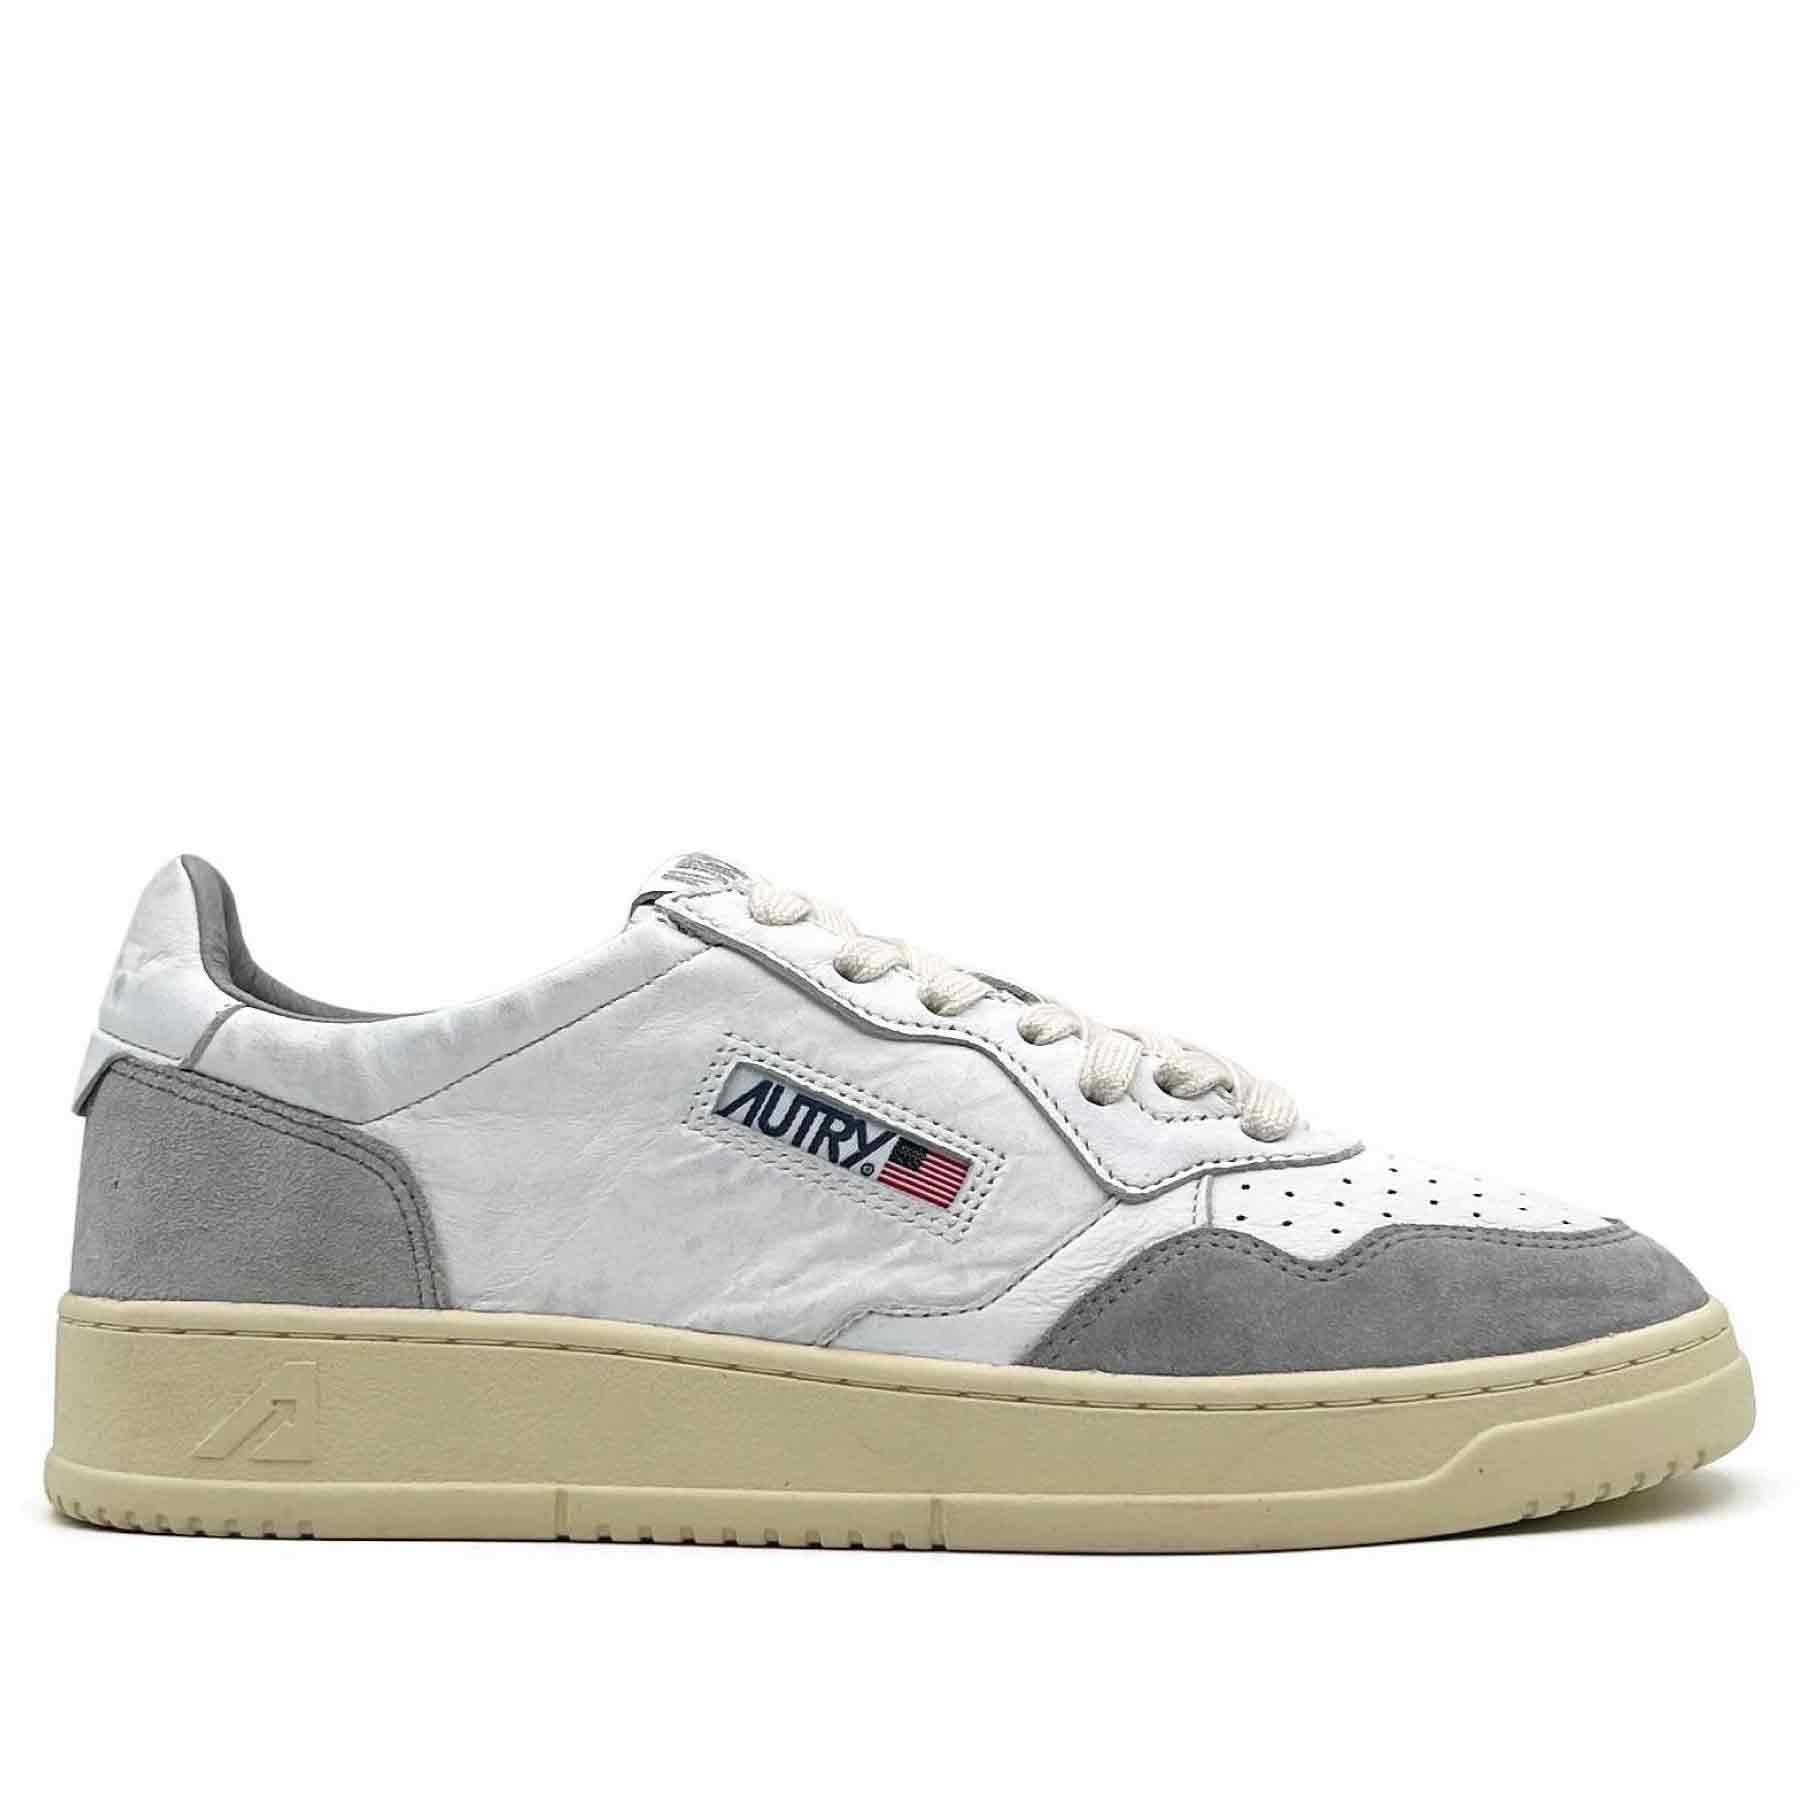 Medalist Low Man White Goat Leather Grey Suede